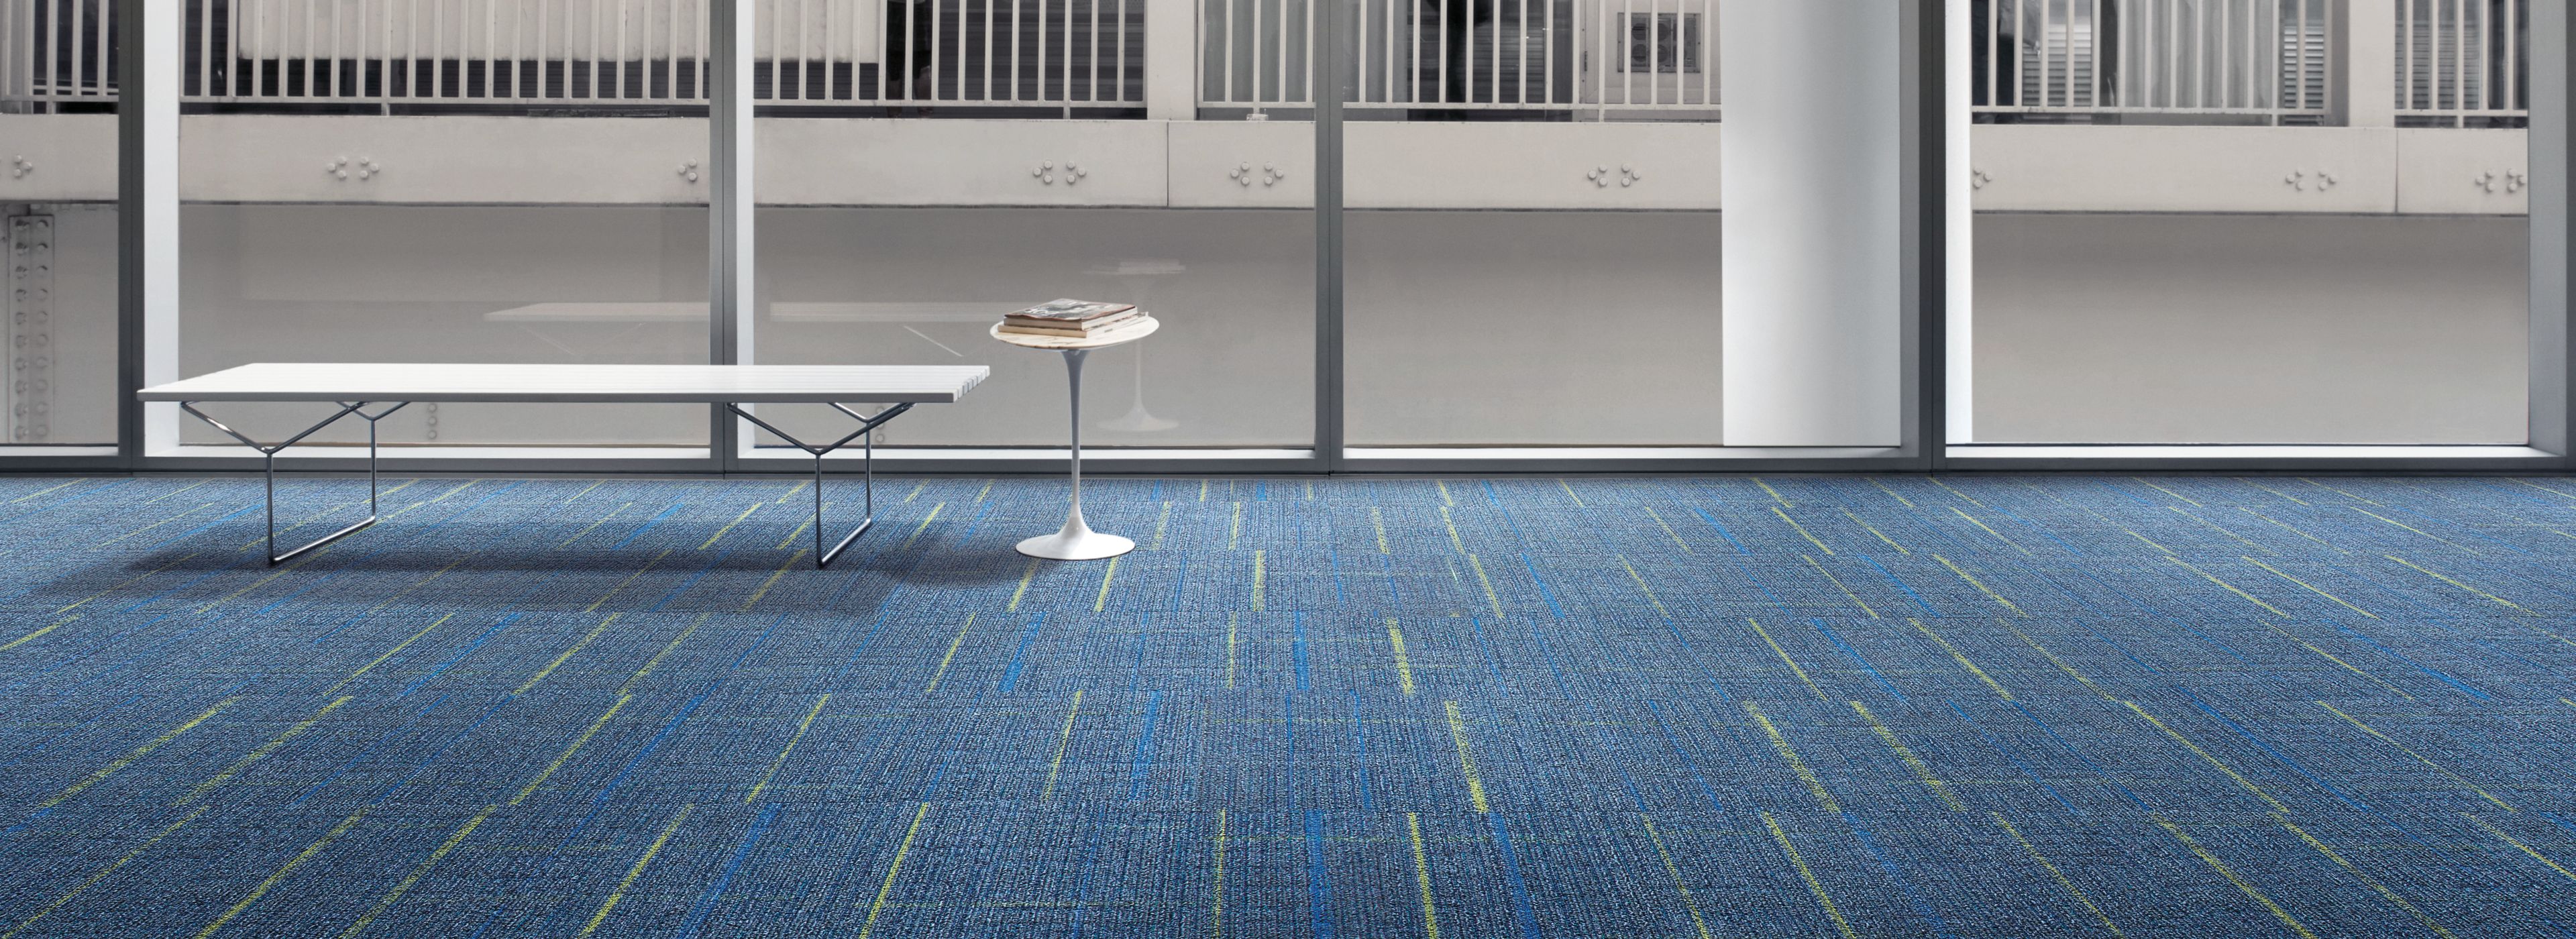 Interface Sidetrack carpet tile in lobby space with bench imagen número 1